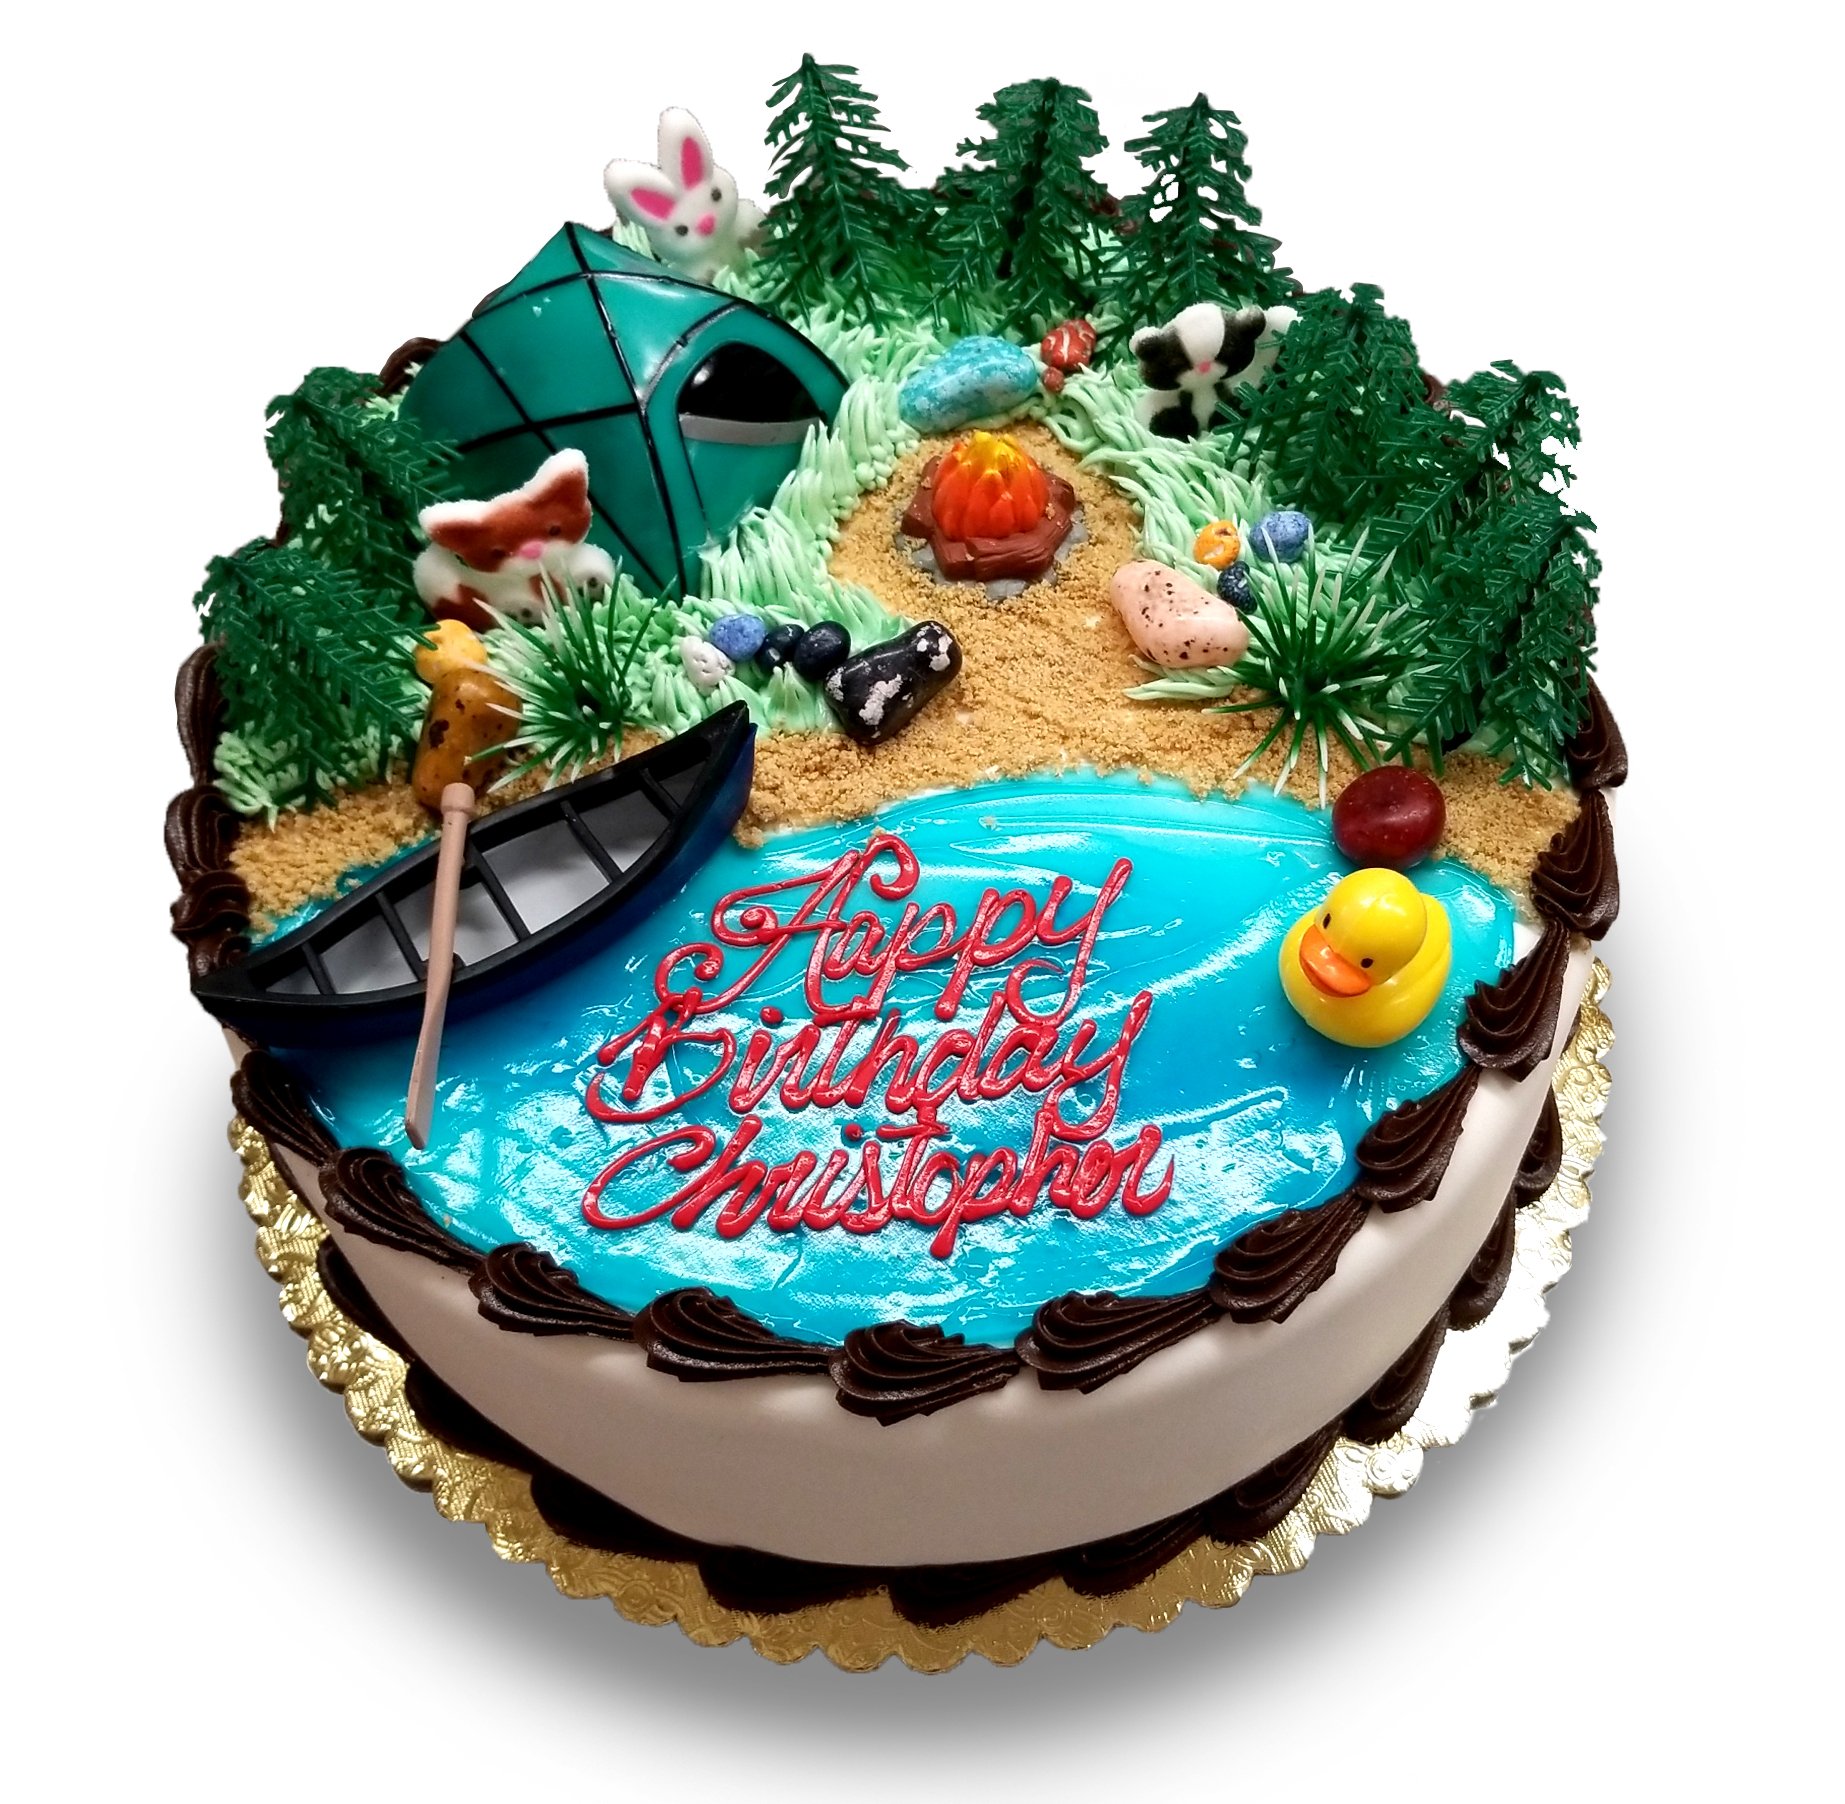 AB028B. Camping themed cake with decopack toys, sugar animals and chocolate rocks (round)